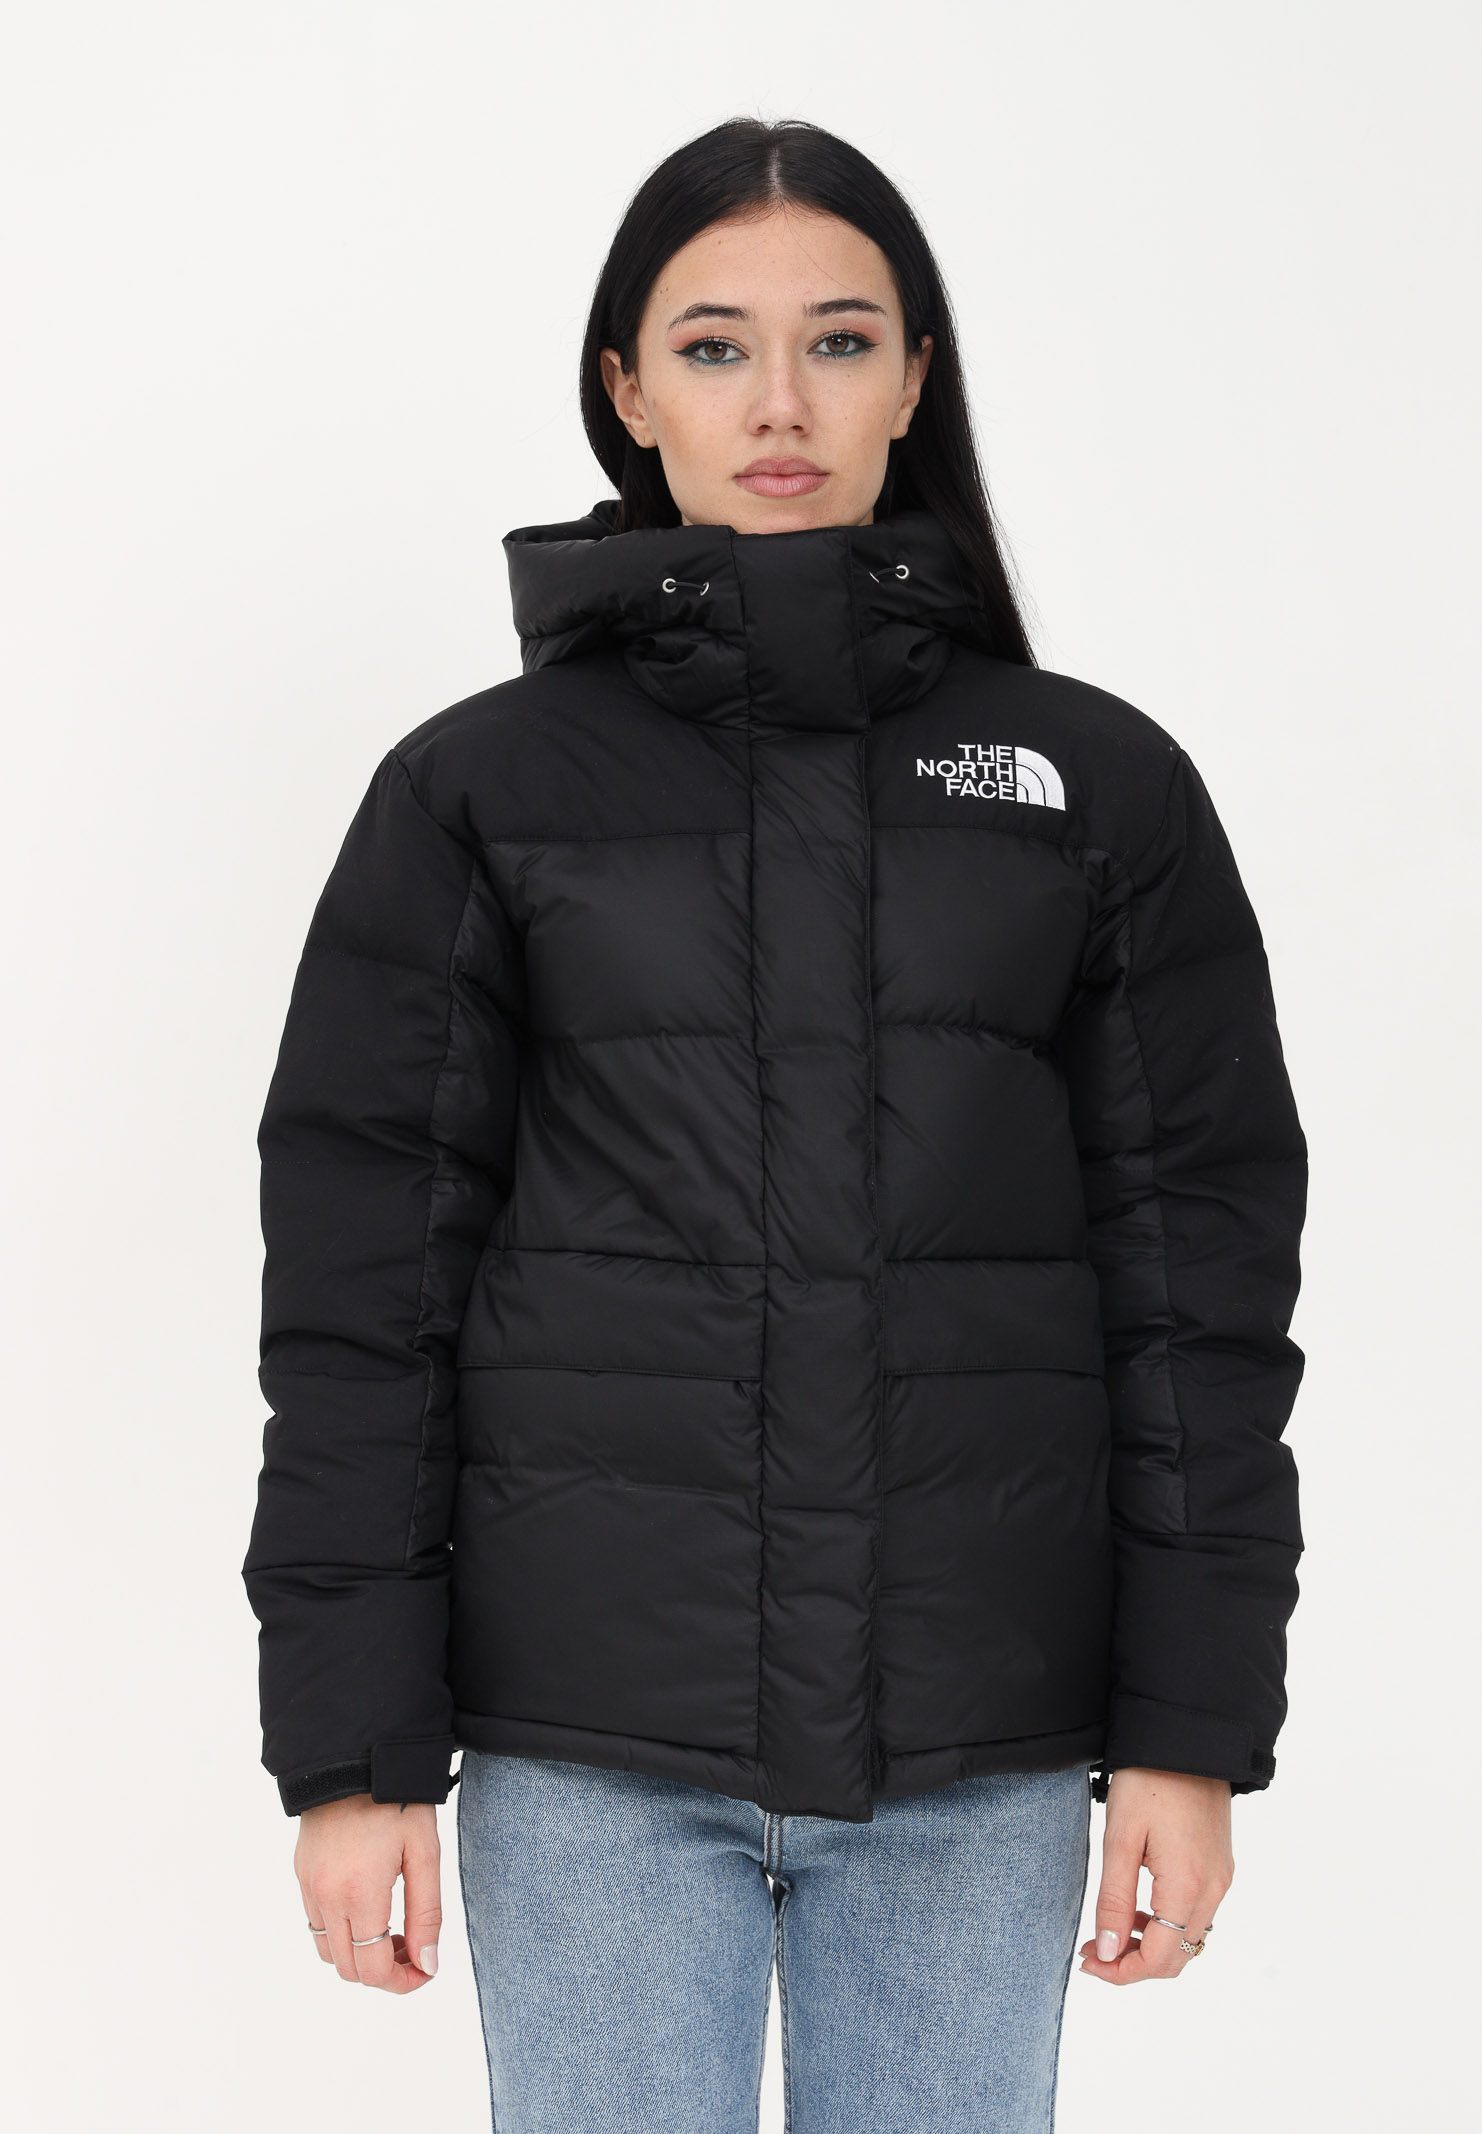 Black women's down jacket with logo - THE NORTH FACE - Pavidas